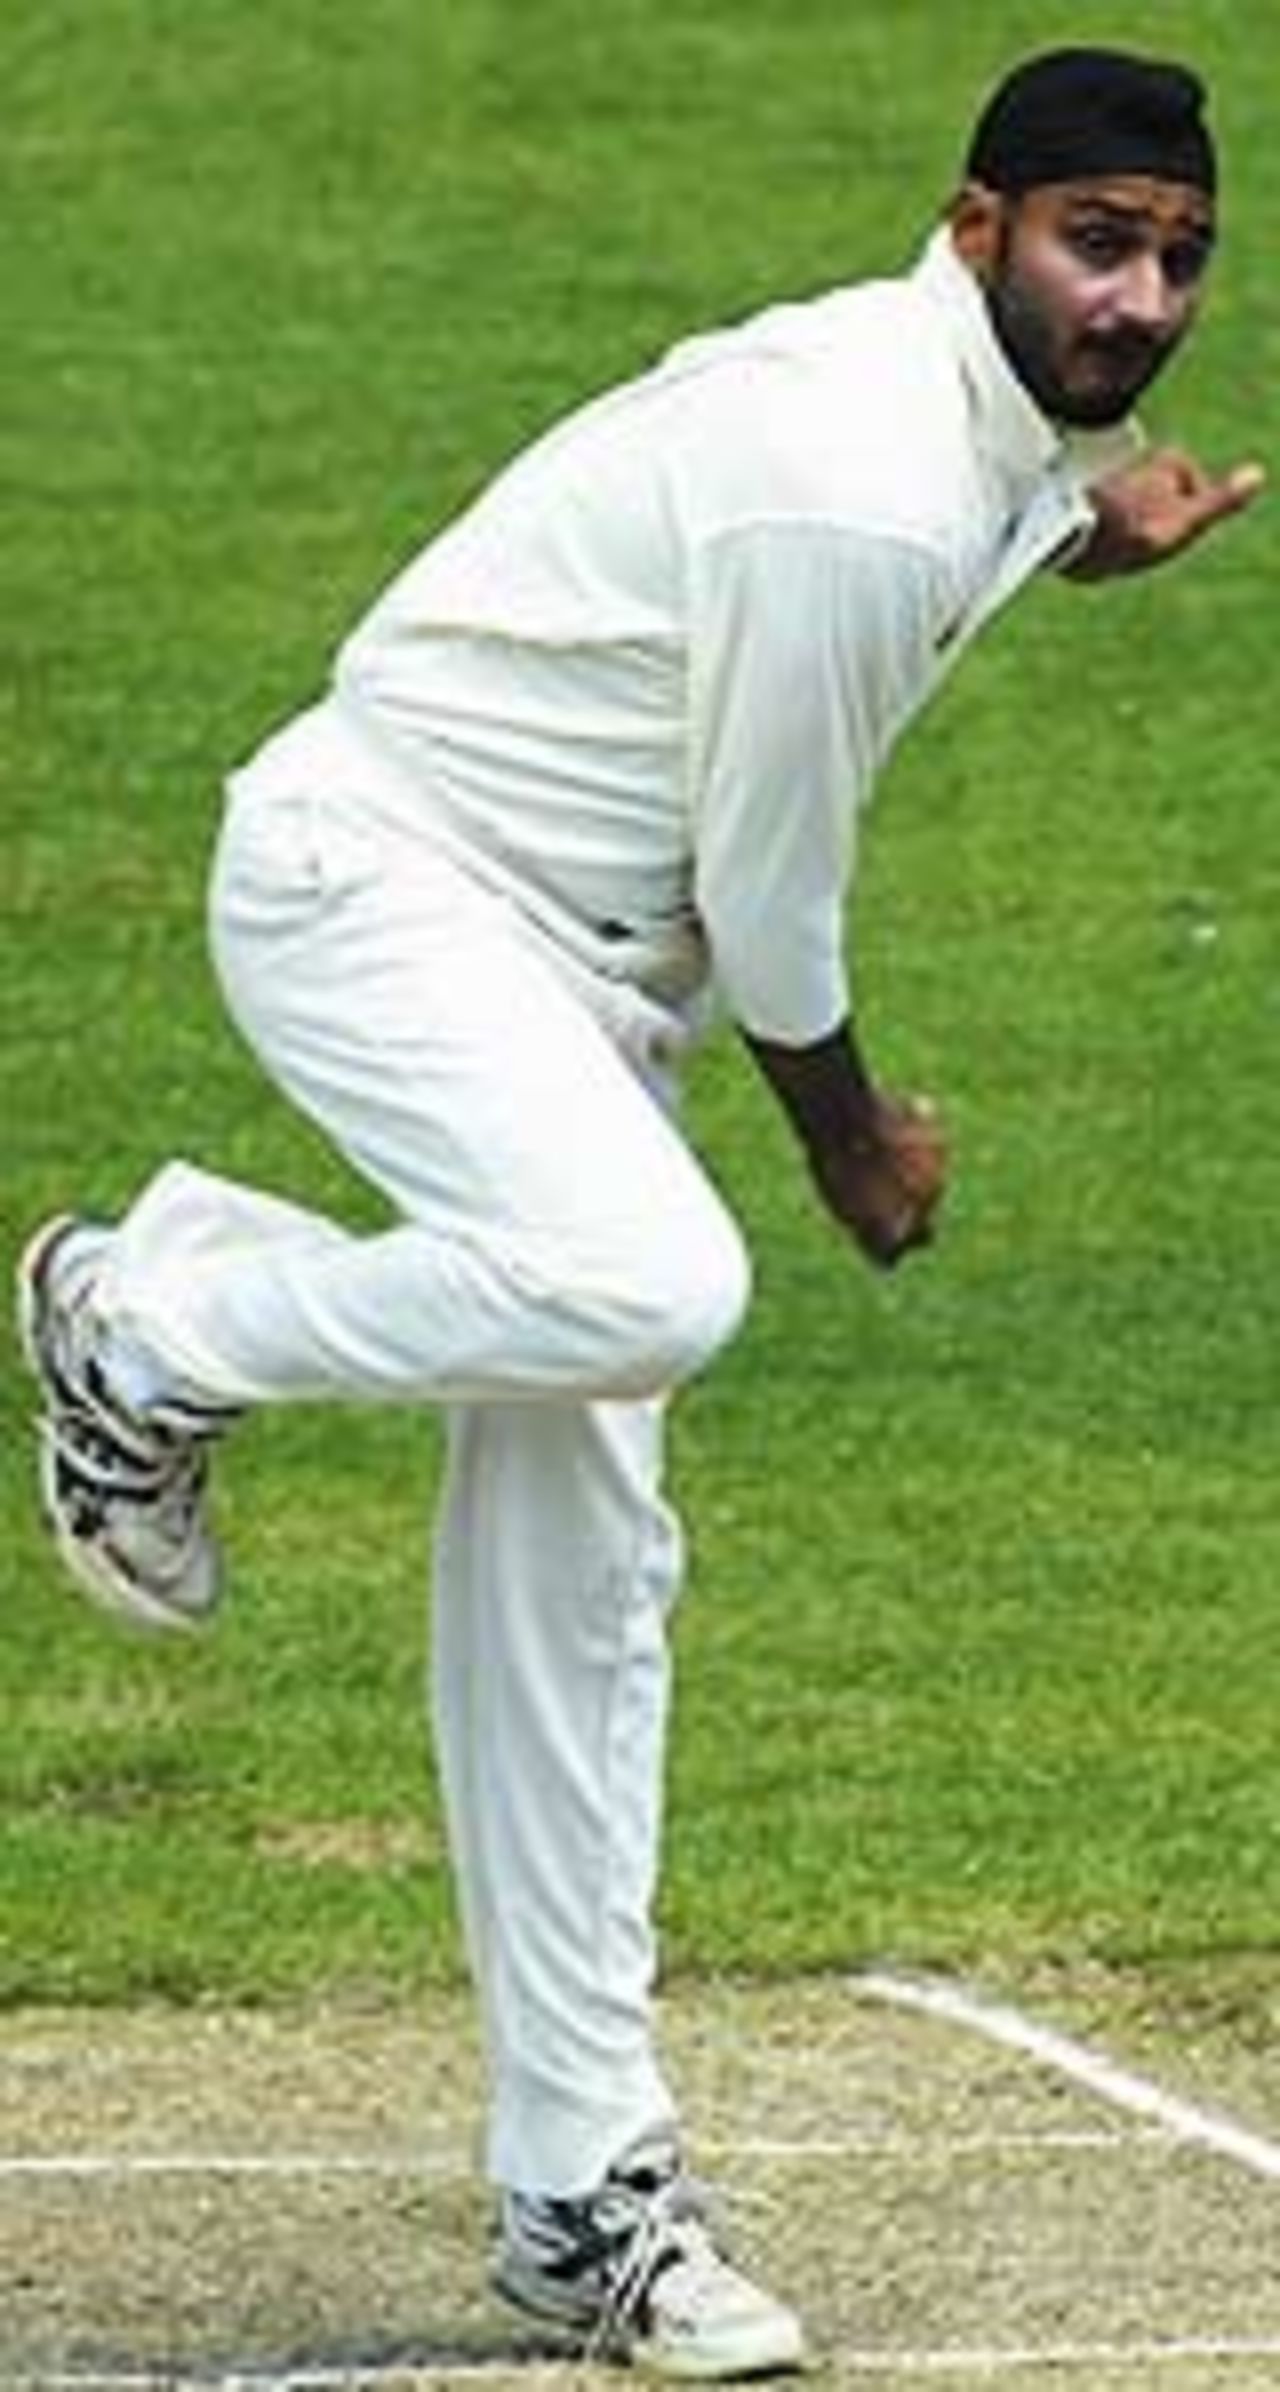 Harbhajan Singh of India in action during day two of the tour match between Victoria and India played at the Melbourne Cricket Ground on November 26, 2003 in Melbourne, Australia.